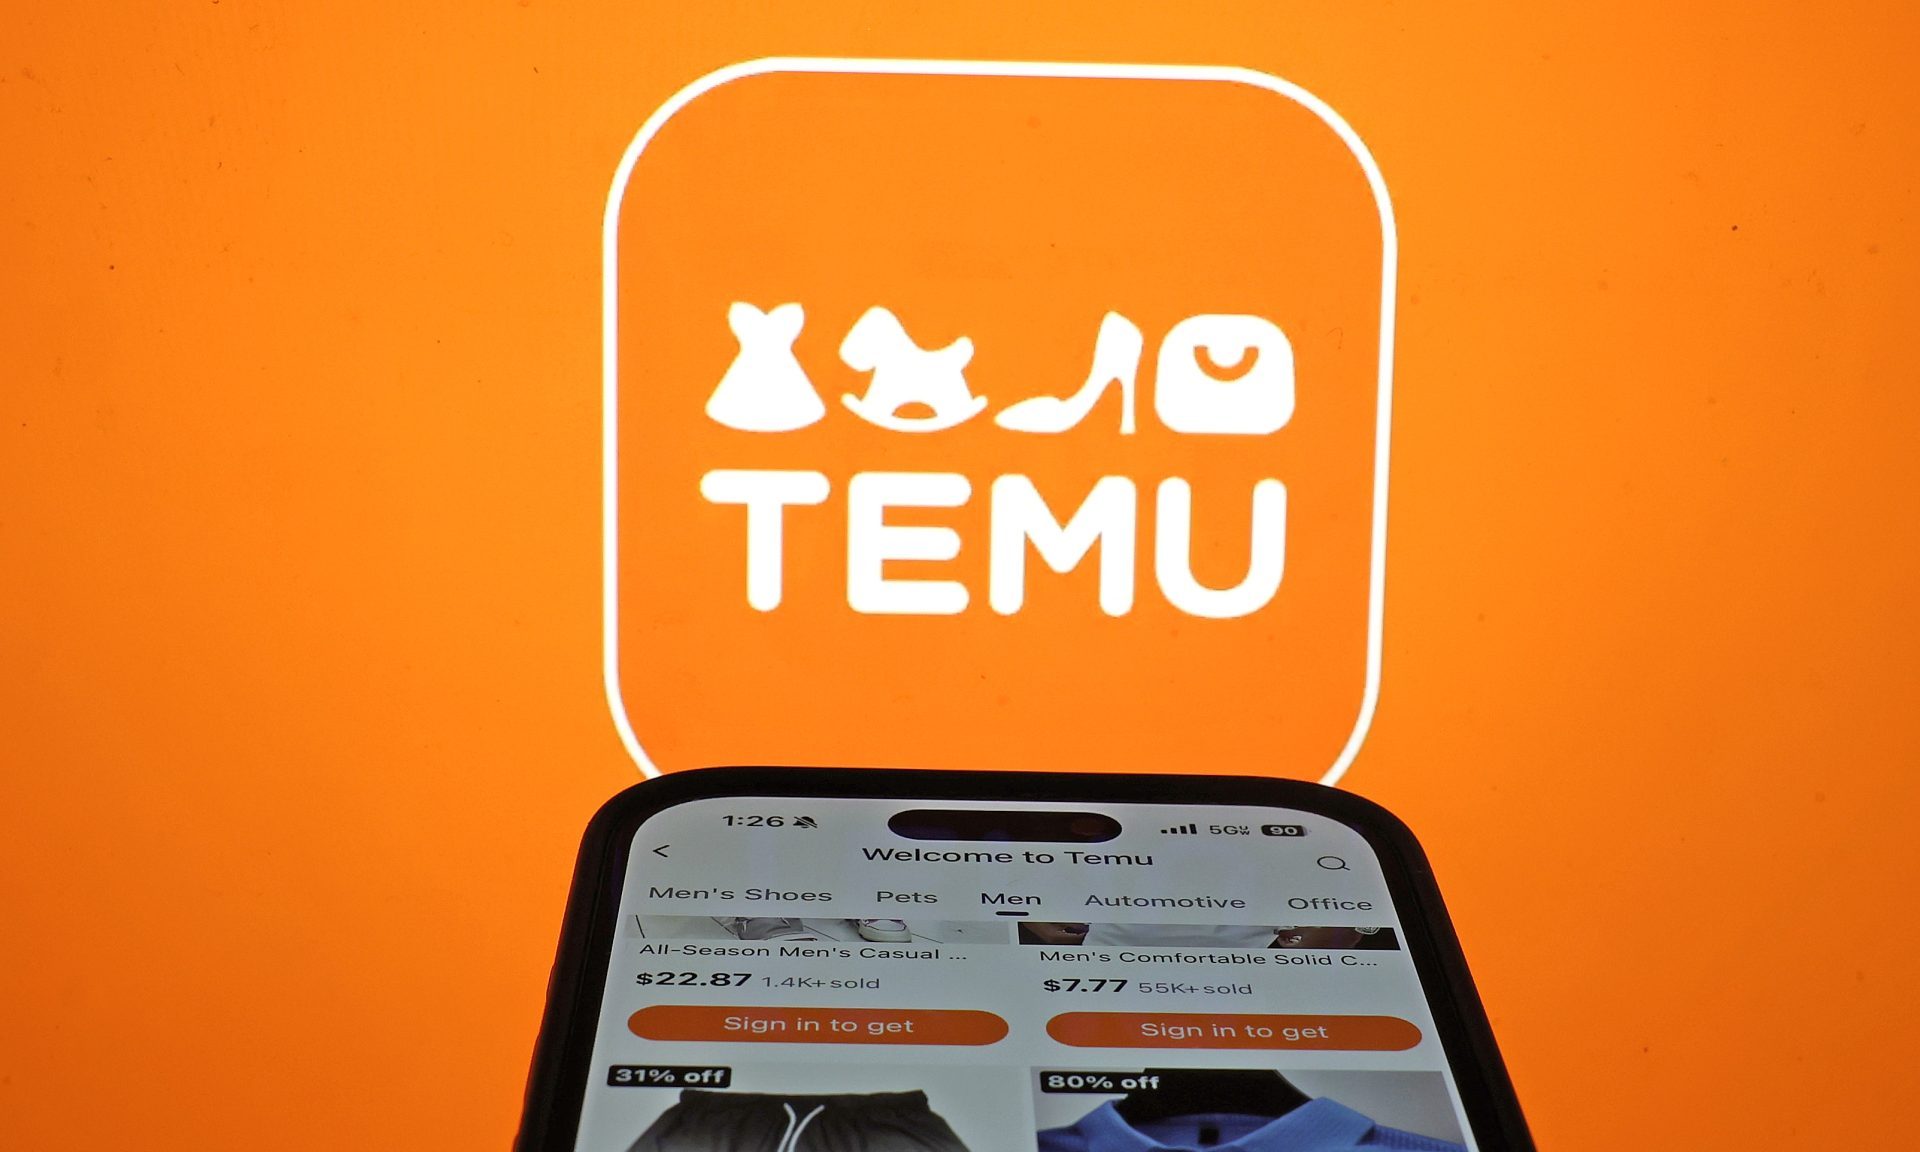 Lawsuit Claims Temu App Can Access "Everything" On Phones